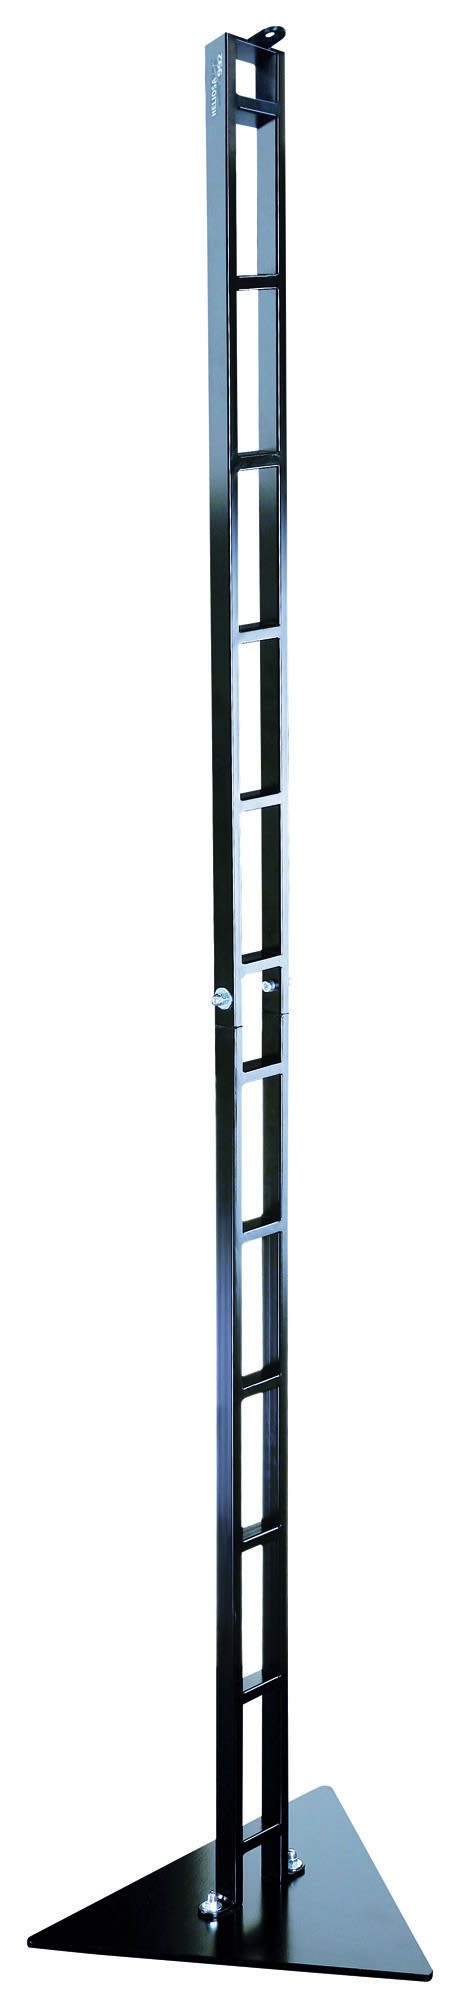 Star Progetti - Pied design Scala blanc pour chauffages infrarouges